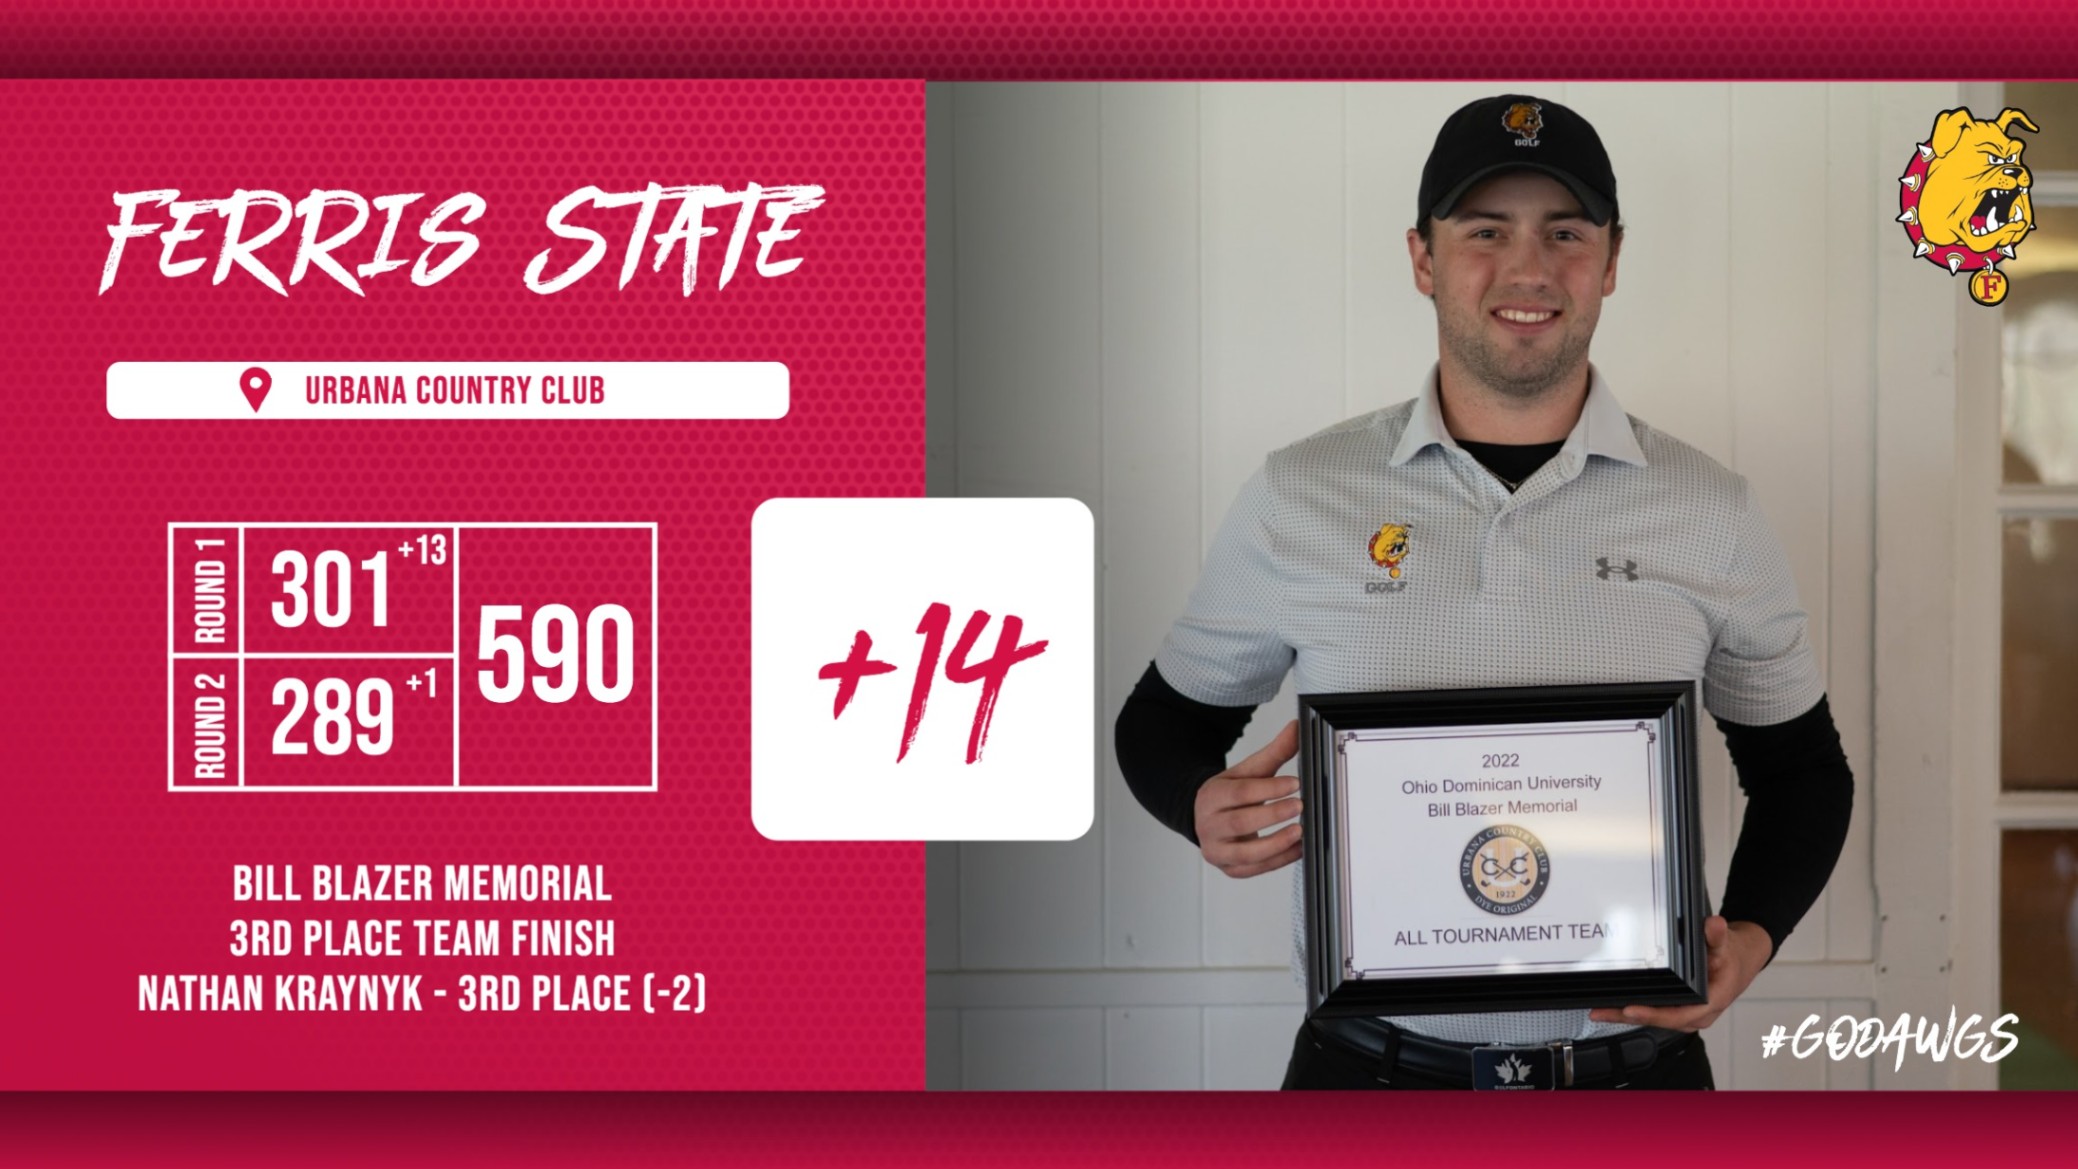 Ferris State Moves Up To Third Place As Nathan Kraynyk Finishes Third Individually At Bill Blazer Memorial